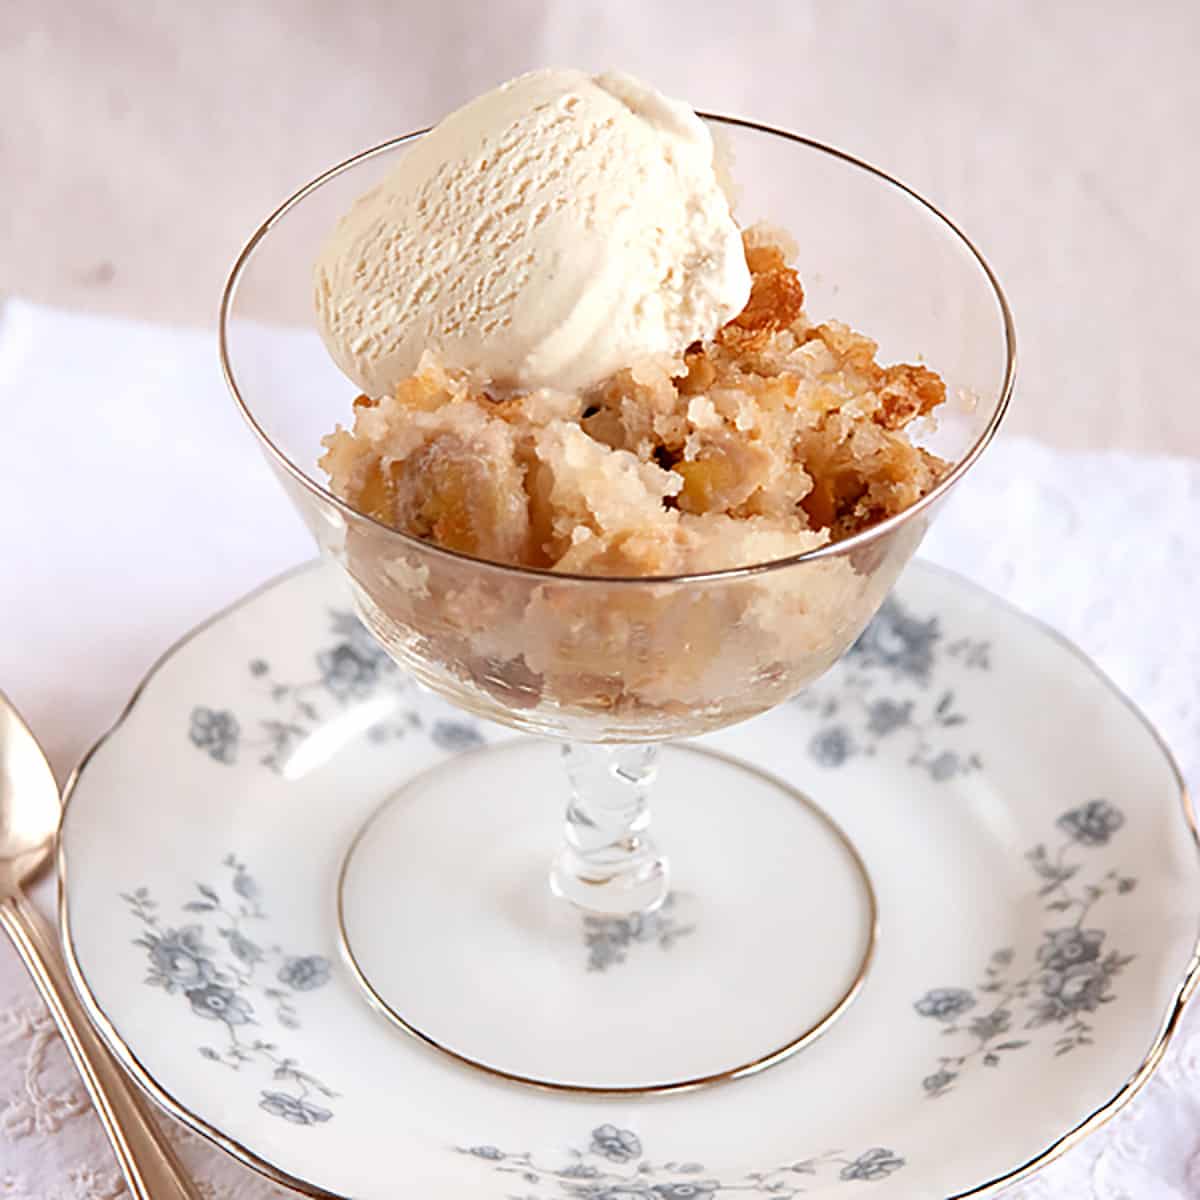 A serving of banana bread cobbler with ice cream.